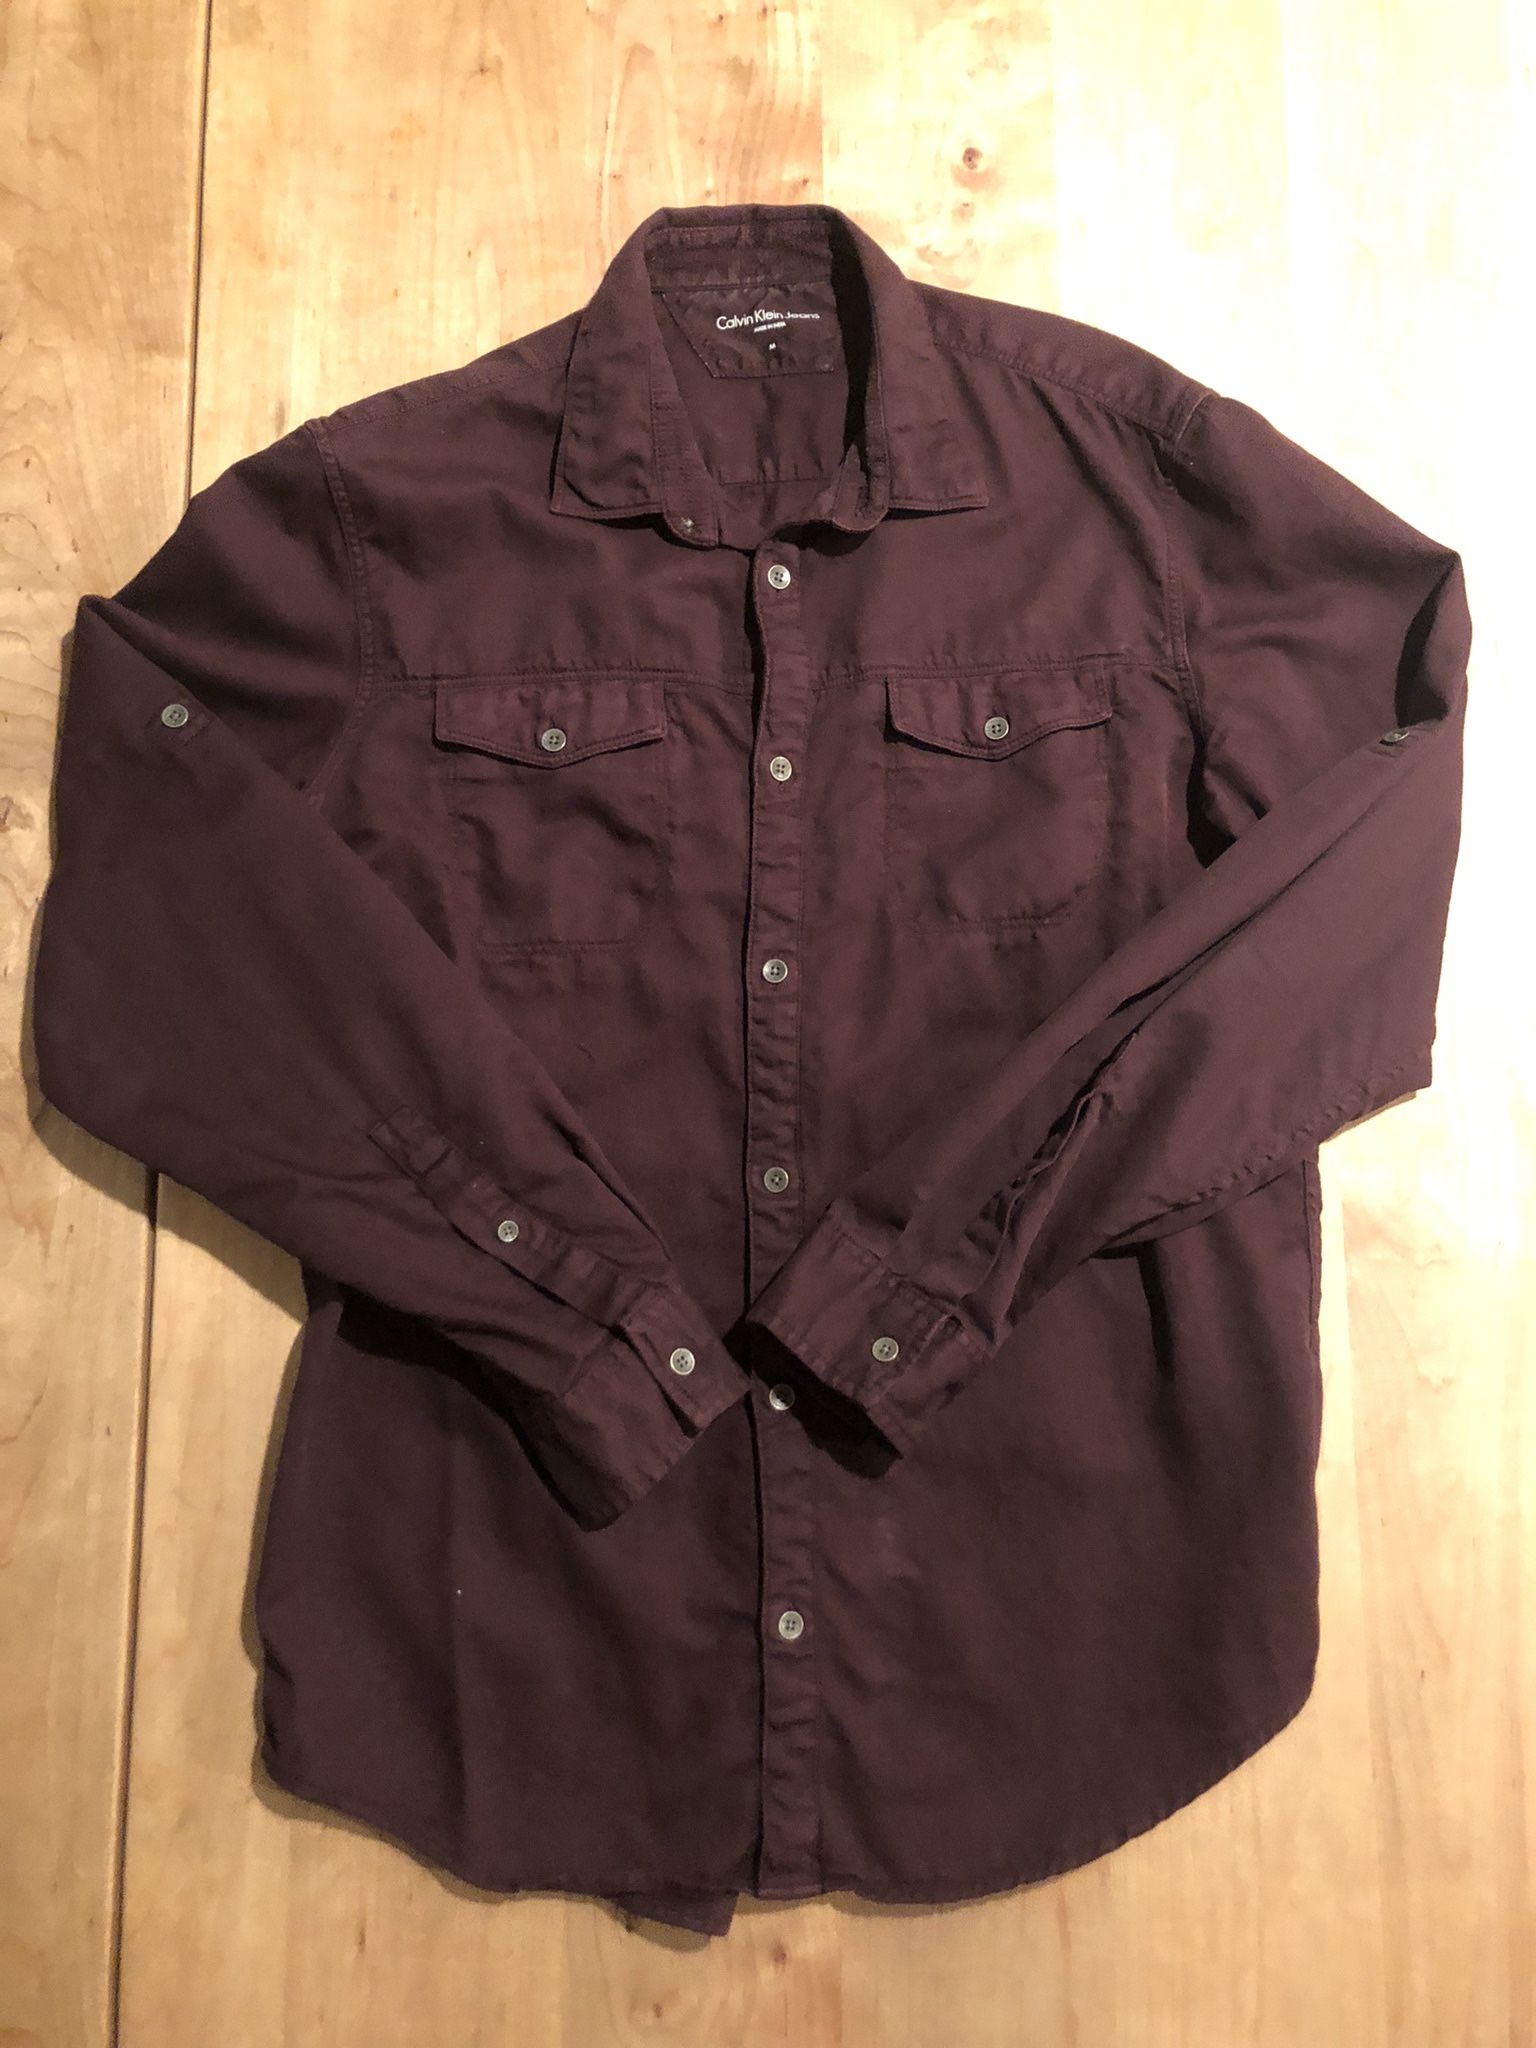 Calvin Klein Button Up Shirt Men’s Large Like New Condition!